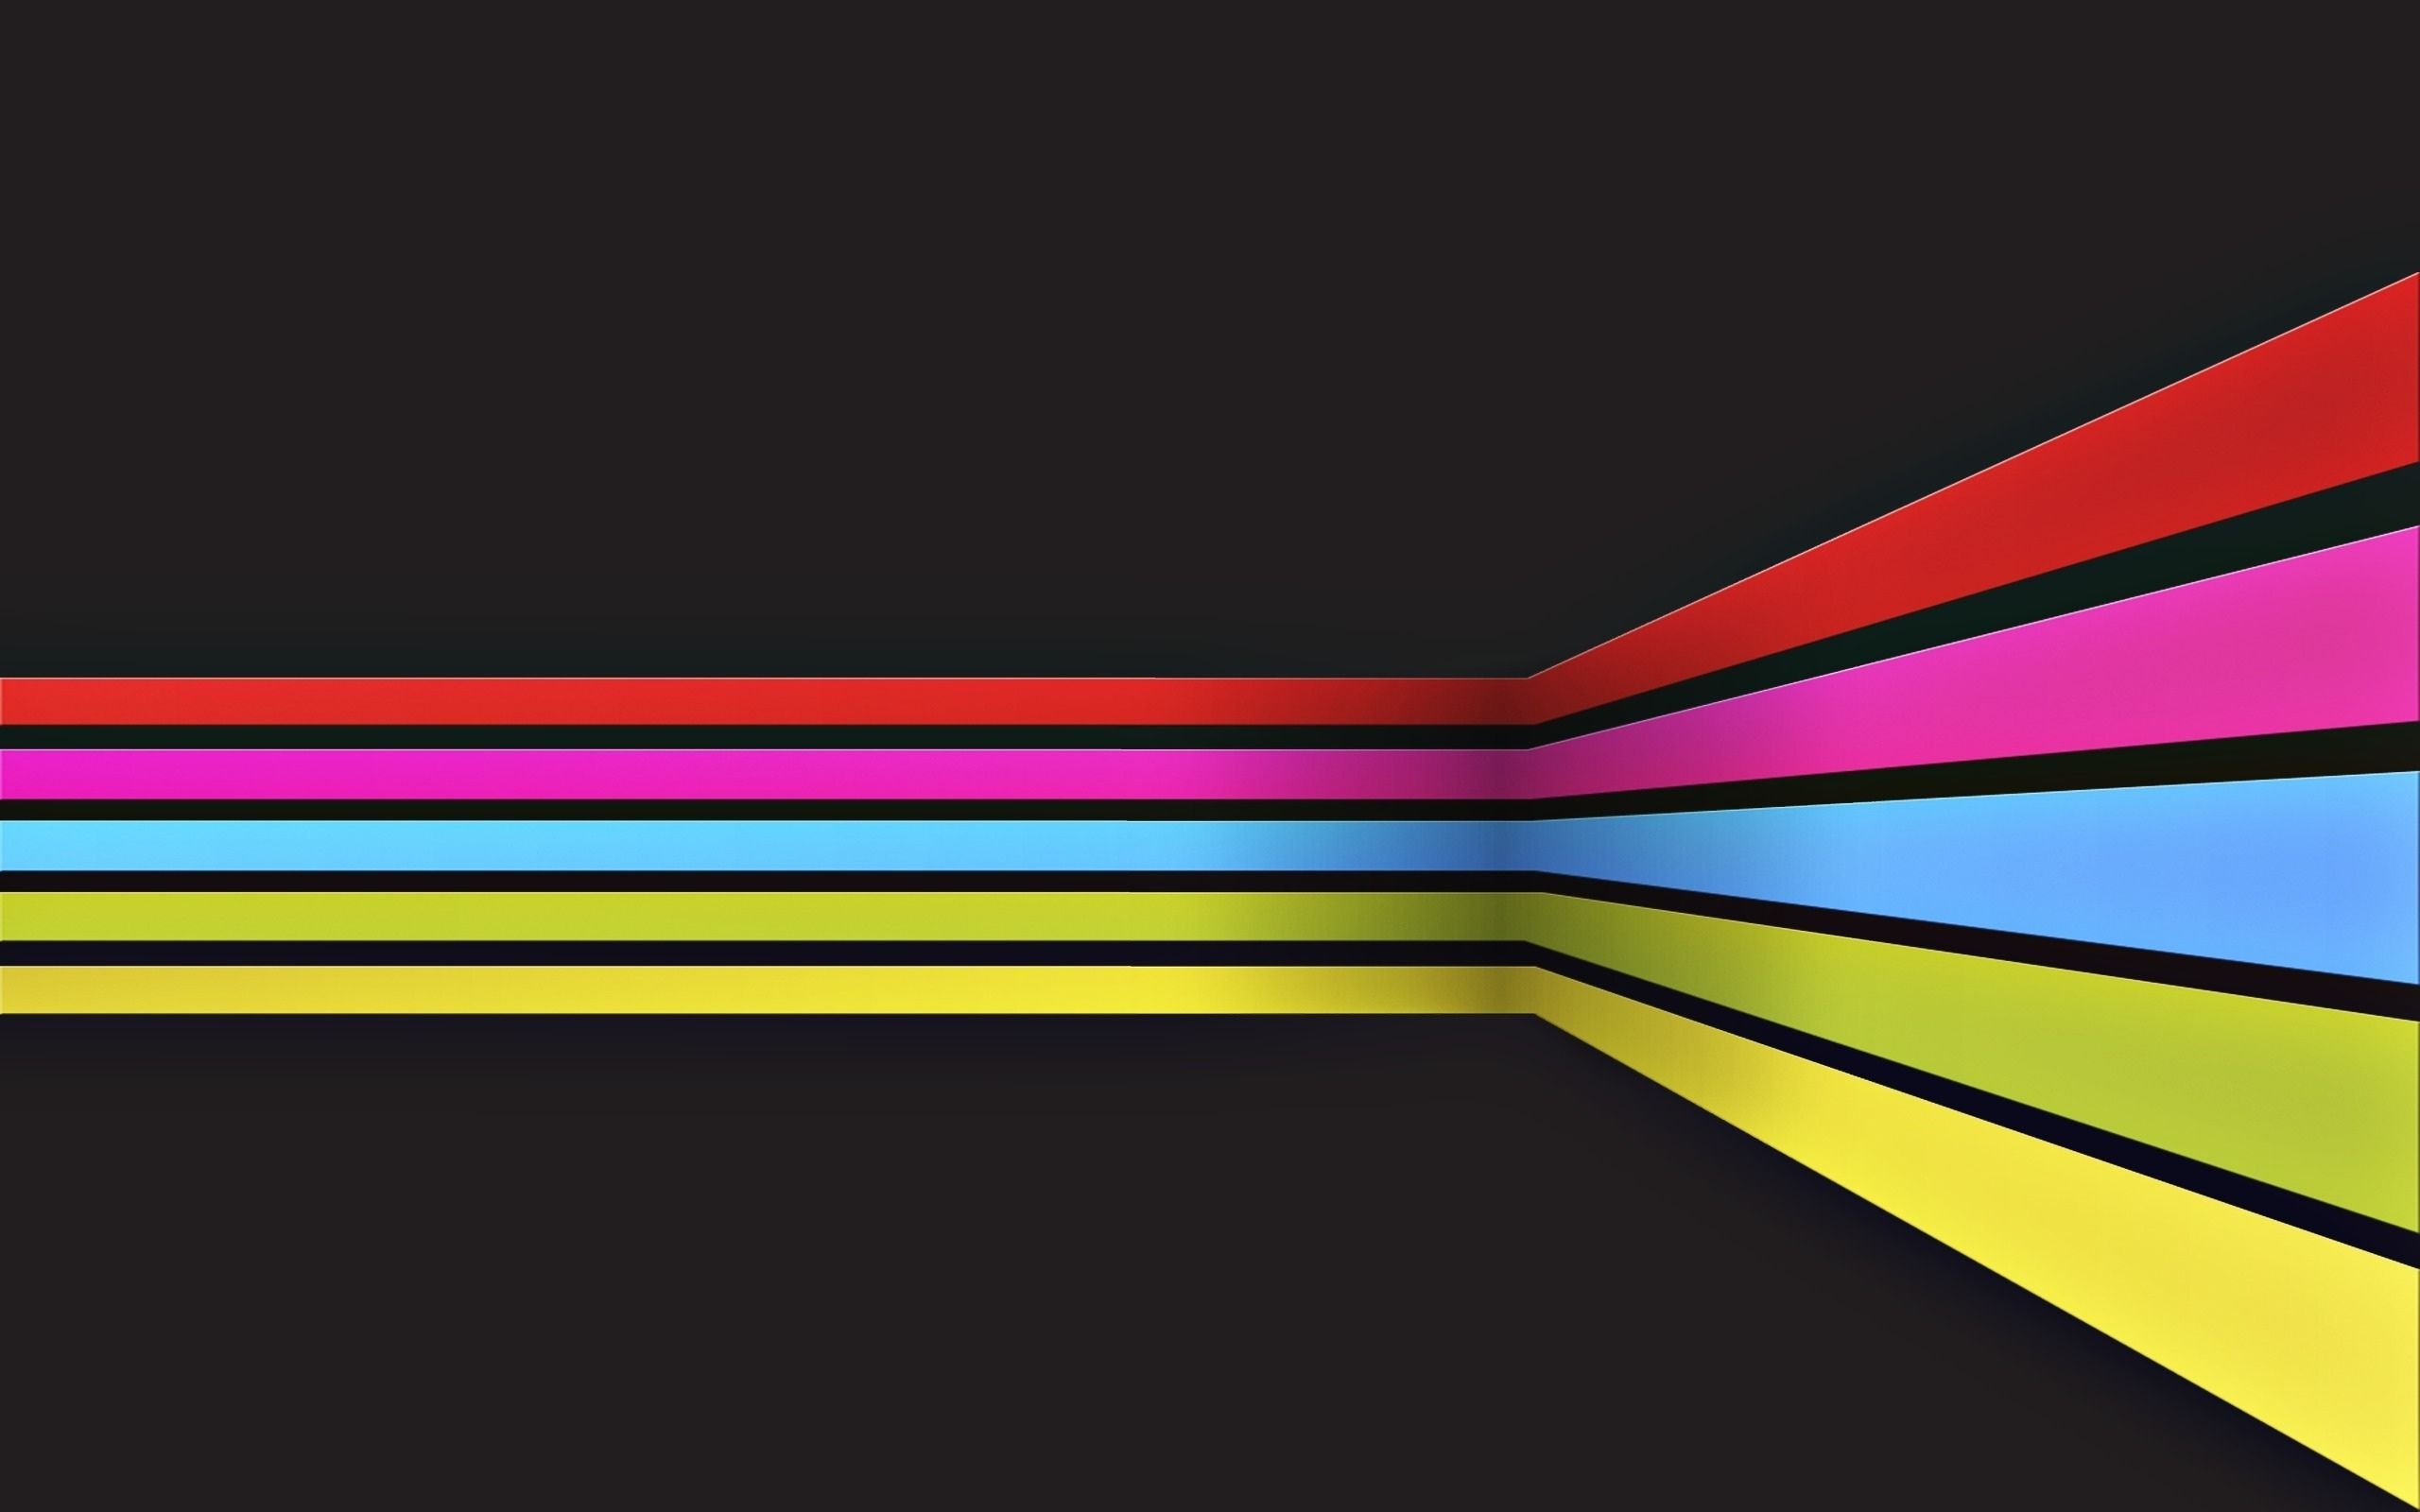 Red, Pink, Blue, and Yellow Lines Against Black